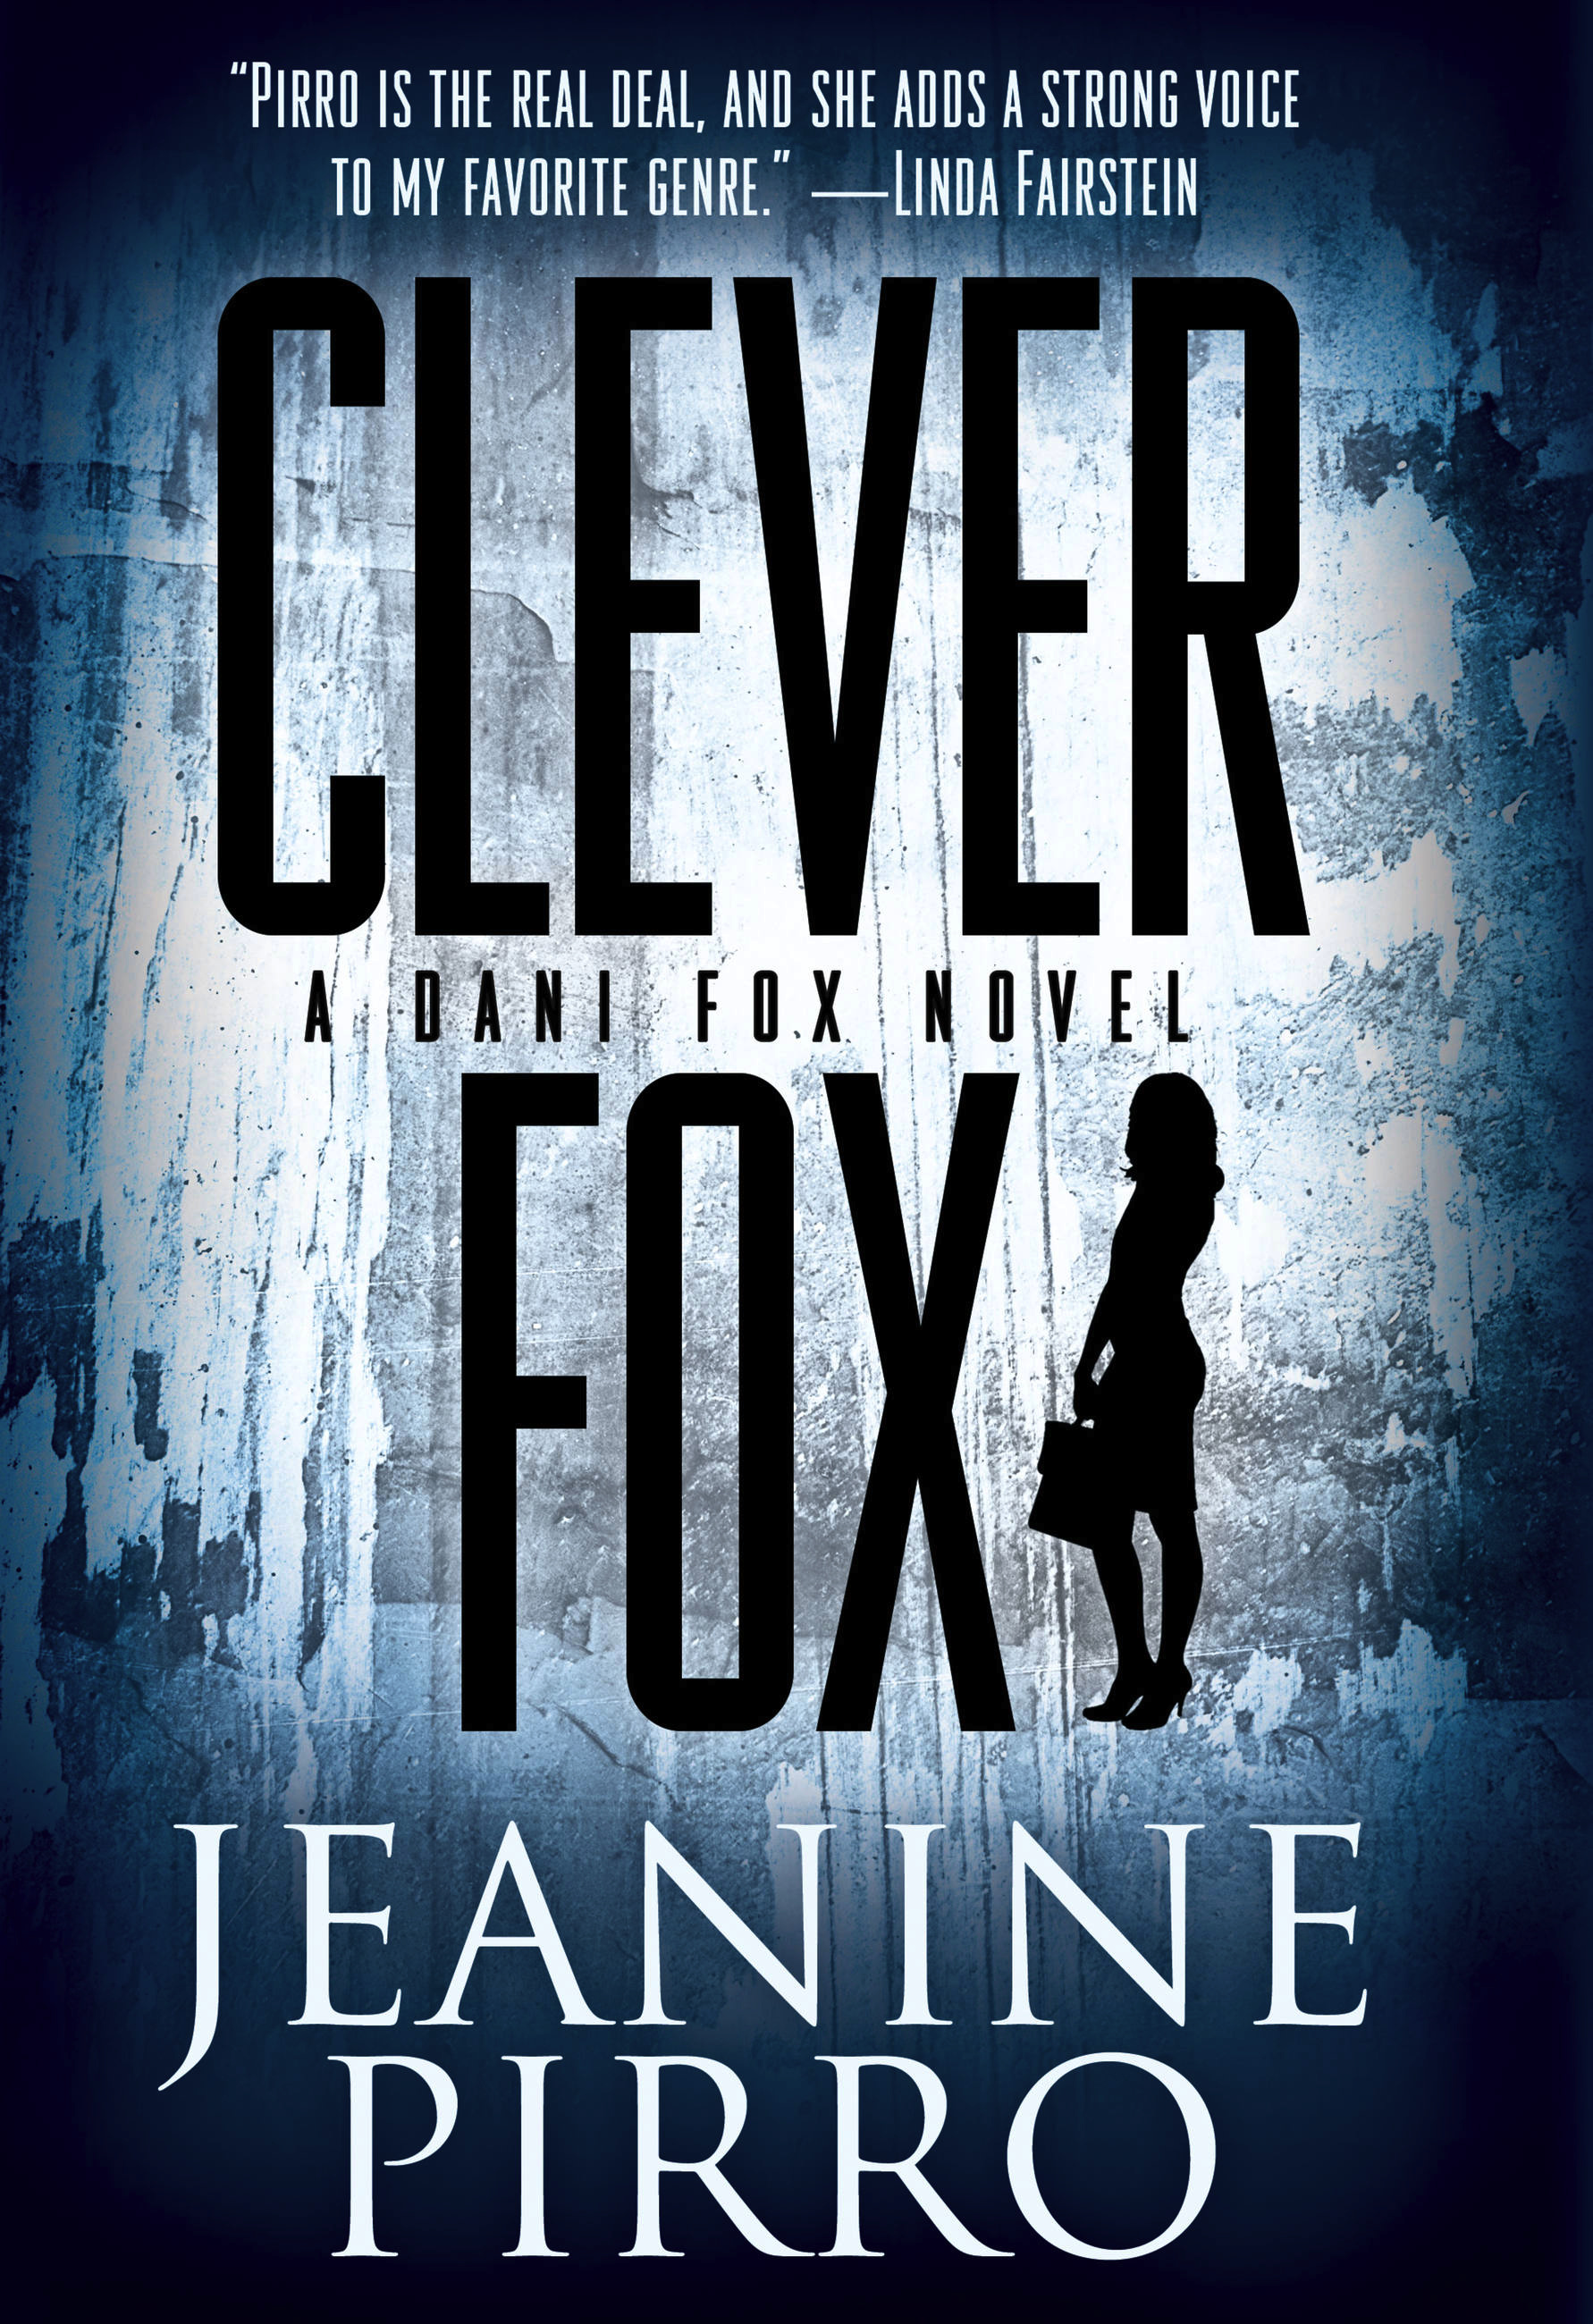 Clever Fox by Judge Jeanine Pirro